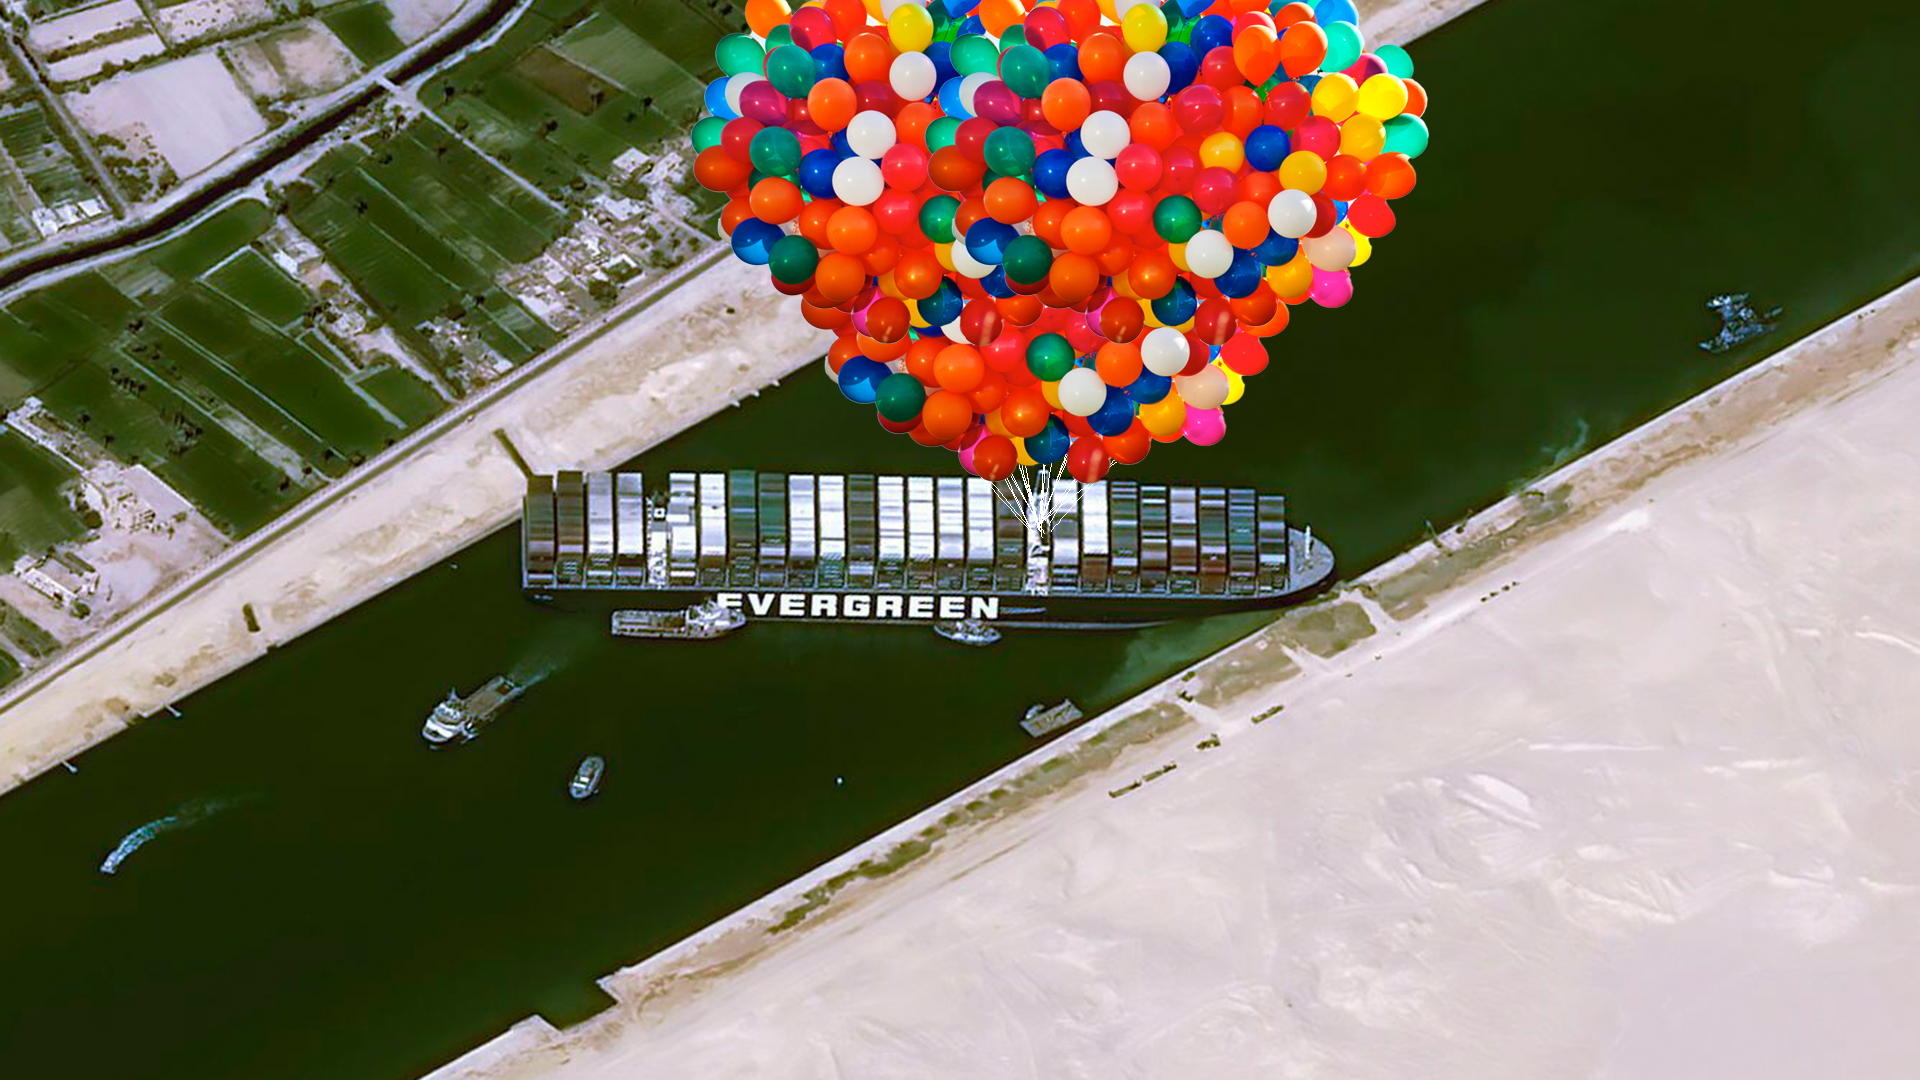 Ever Given container ship with balloons attached